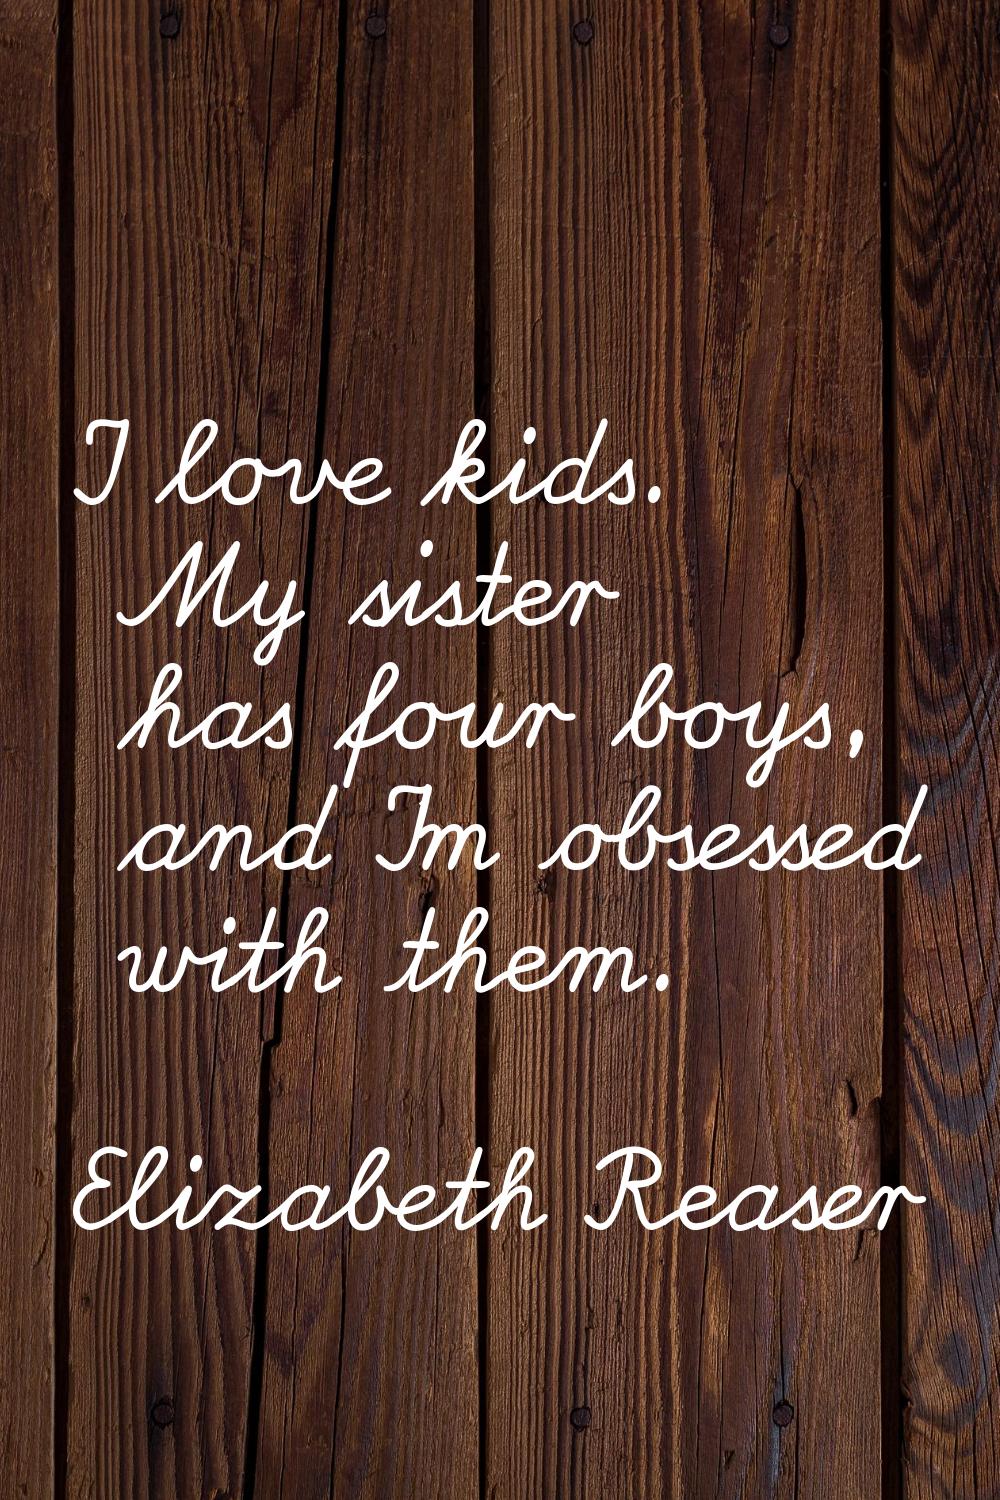 I love kids. My sister has four boys, and I'm obsessed with them.